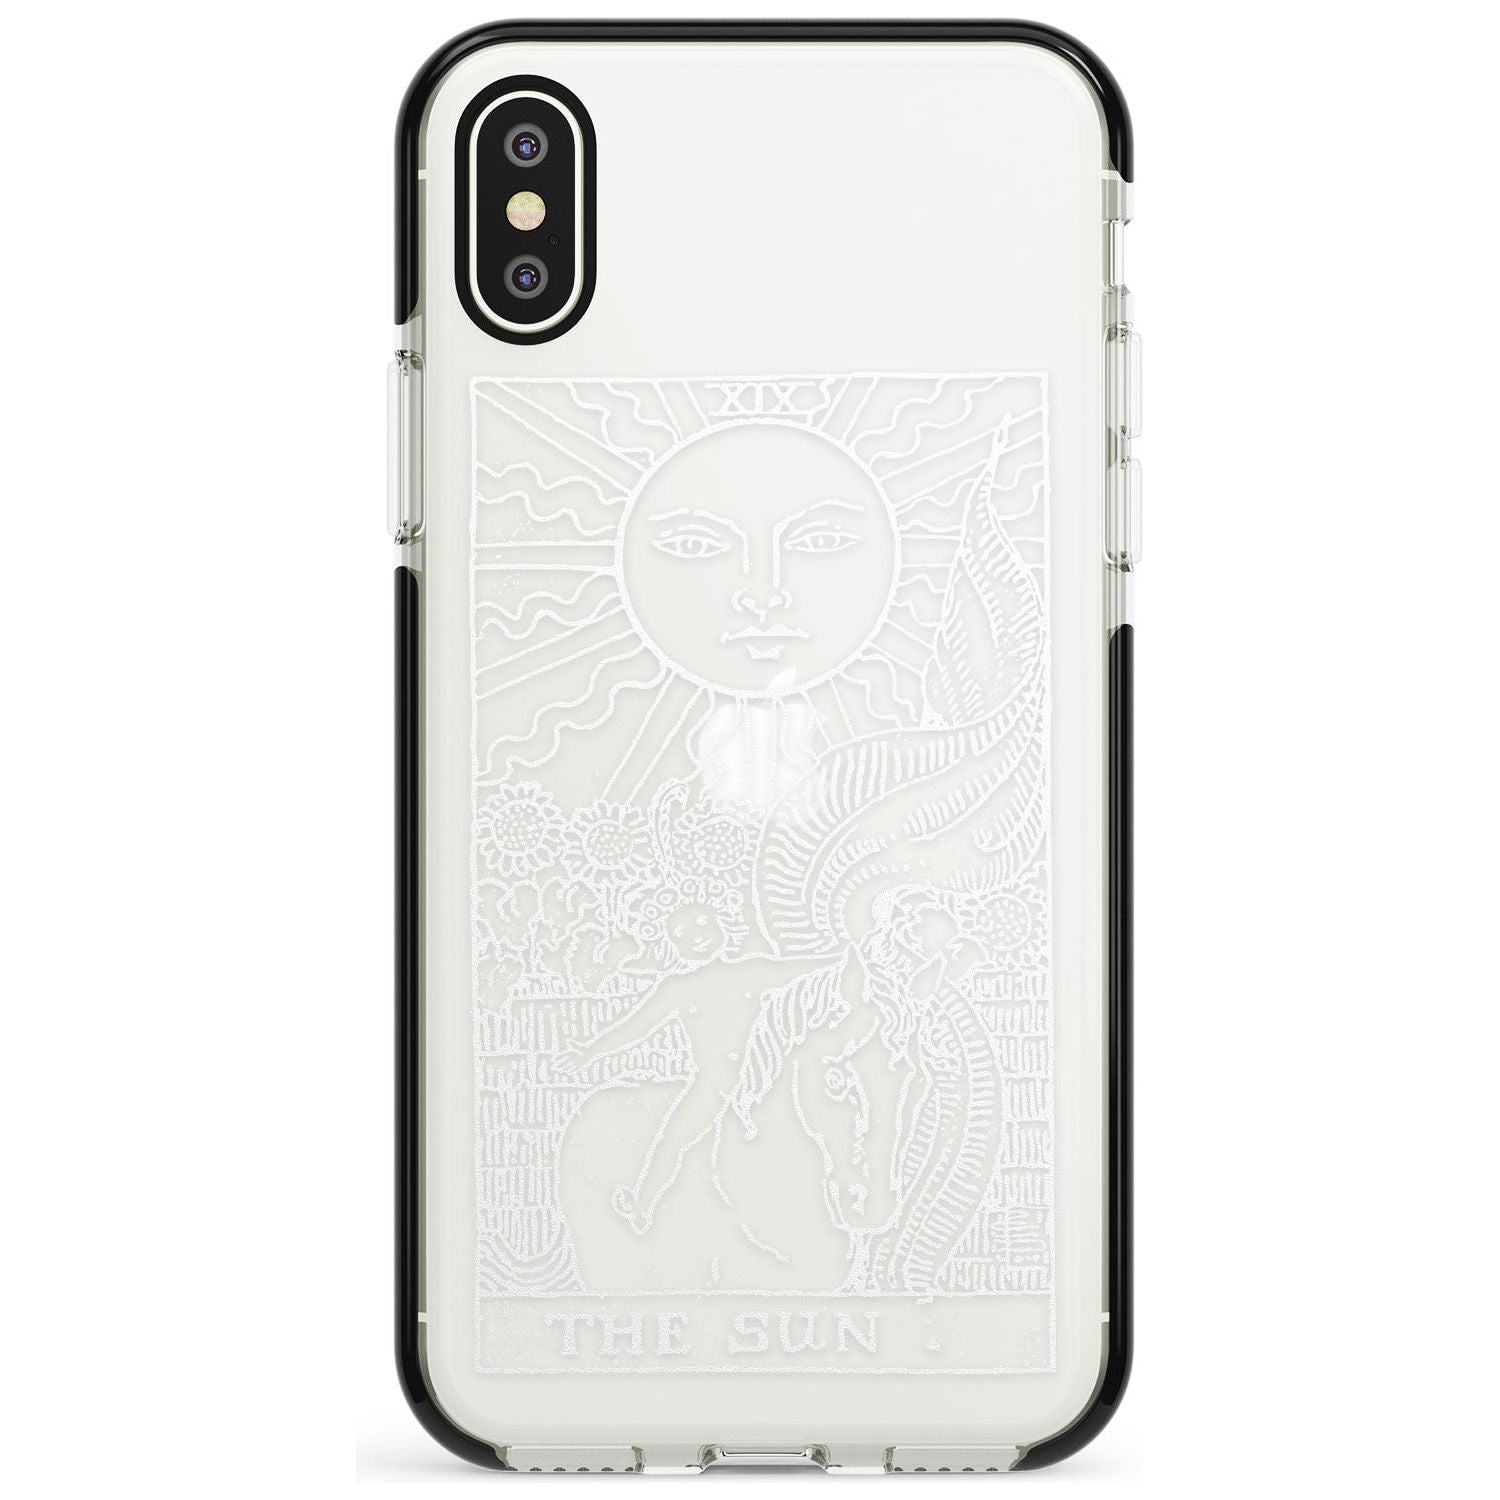 The Sun Tarot Card - White Transparent Pink Fade Impact Phone Case for iPhone X XS Max XR